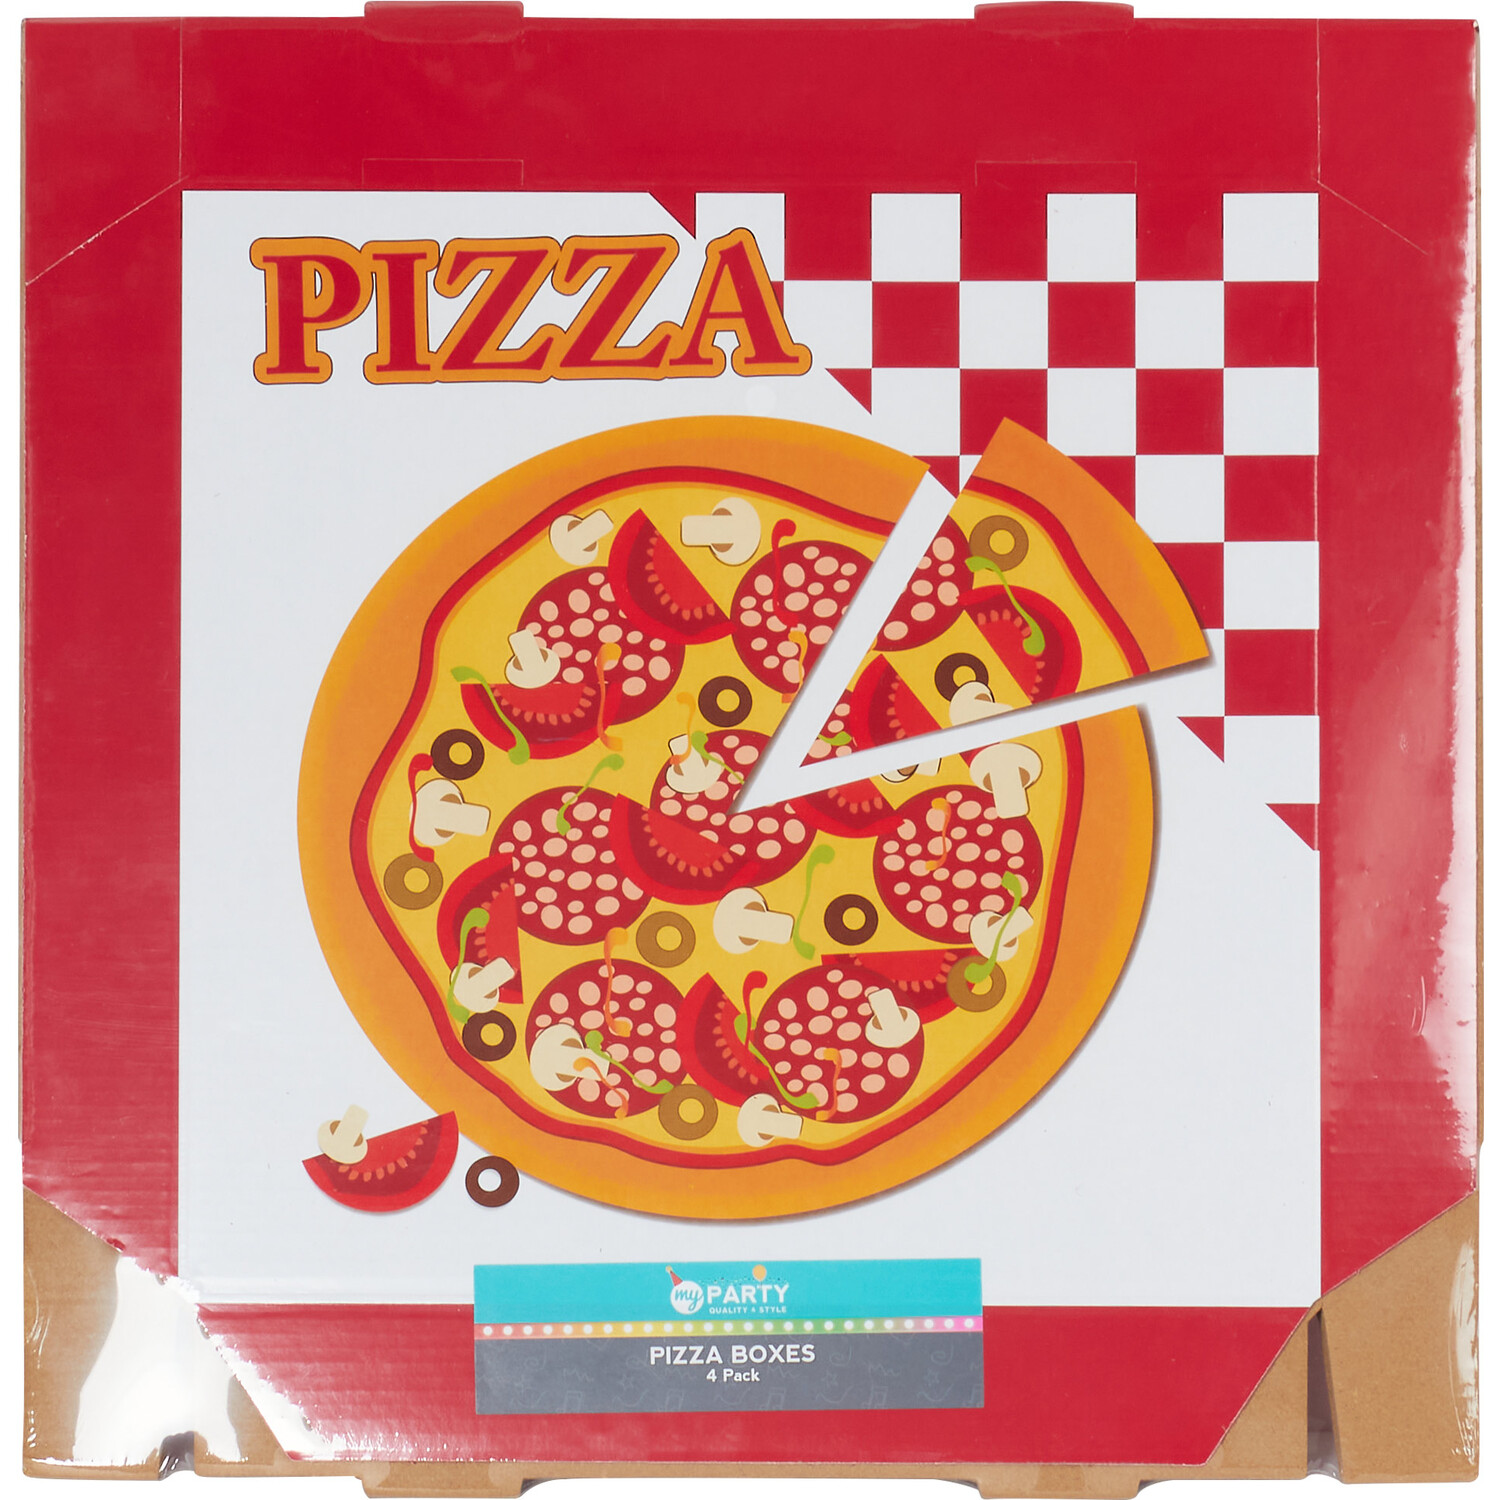 Pack of 4 Pizza Boxes - White Image 1